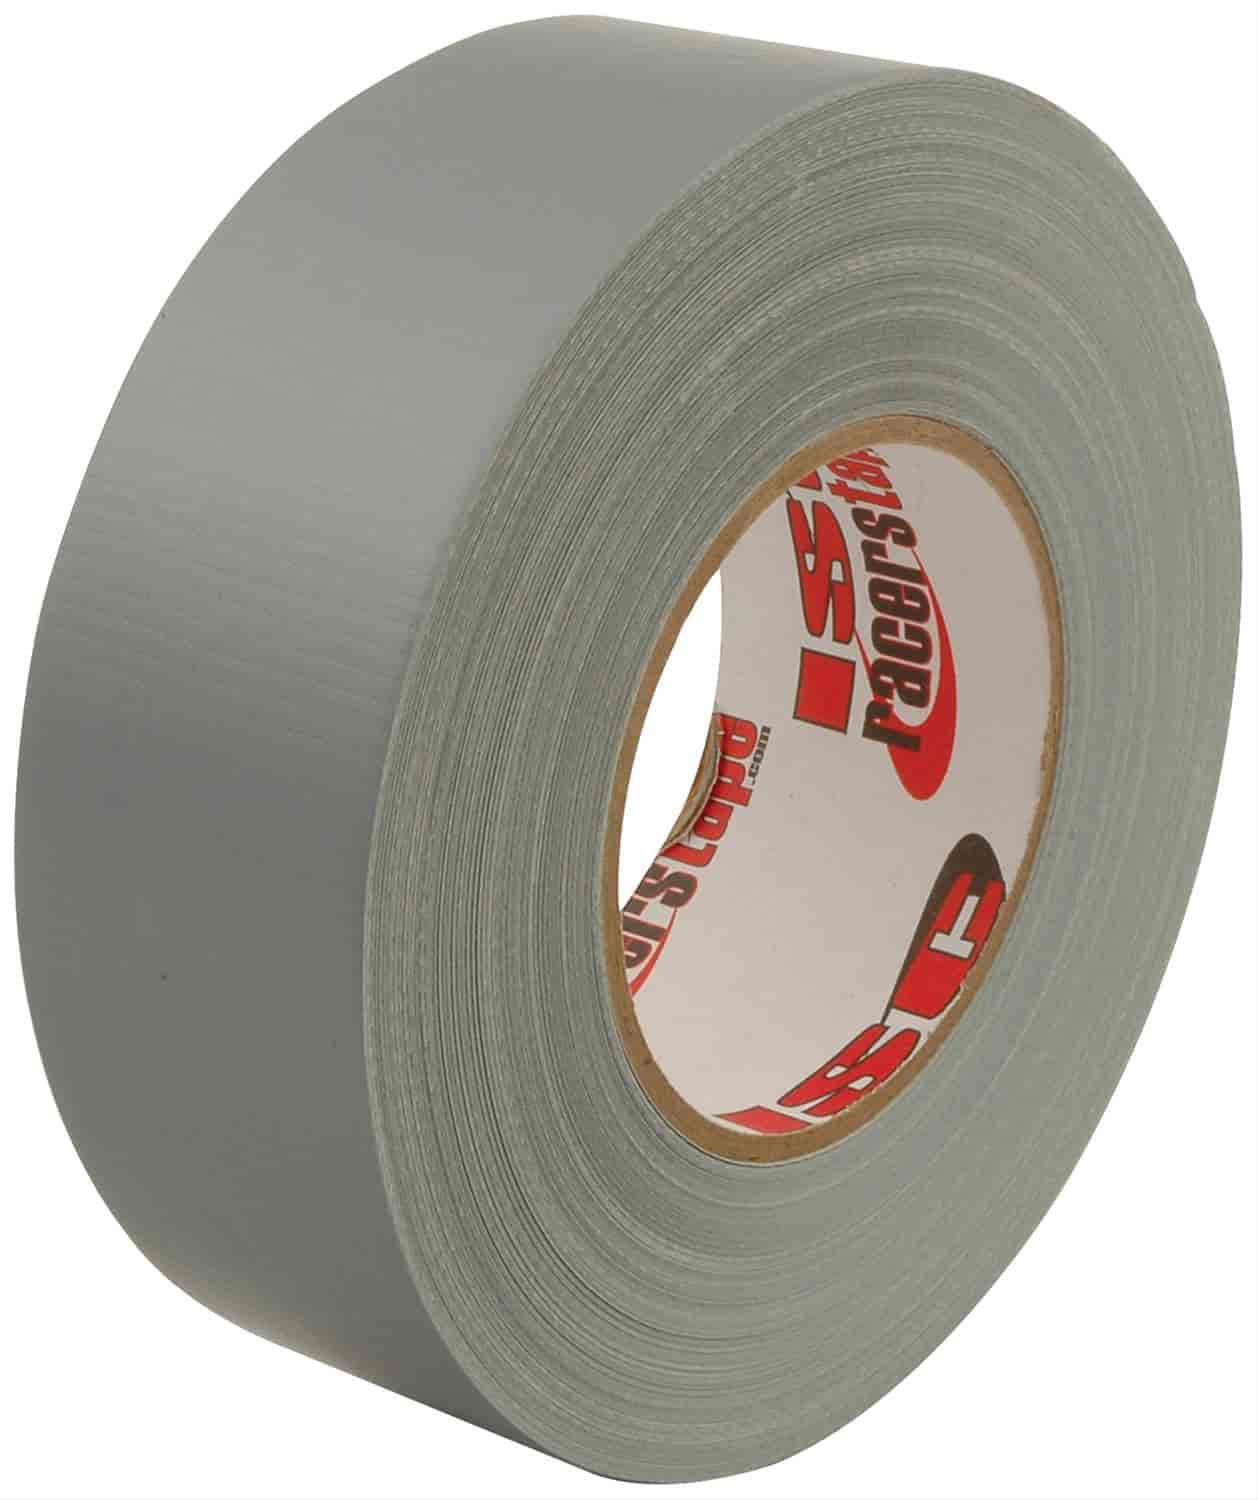 2" x 180" Racer"s Tape Silver